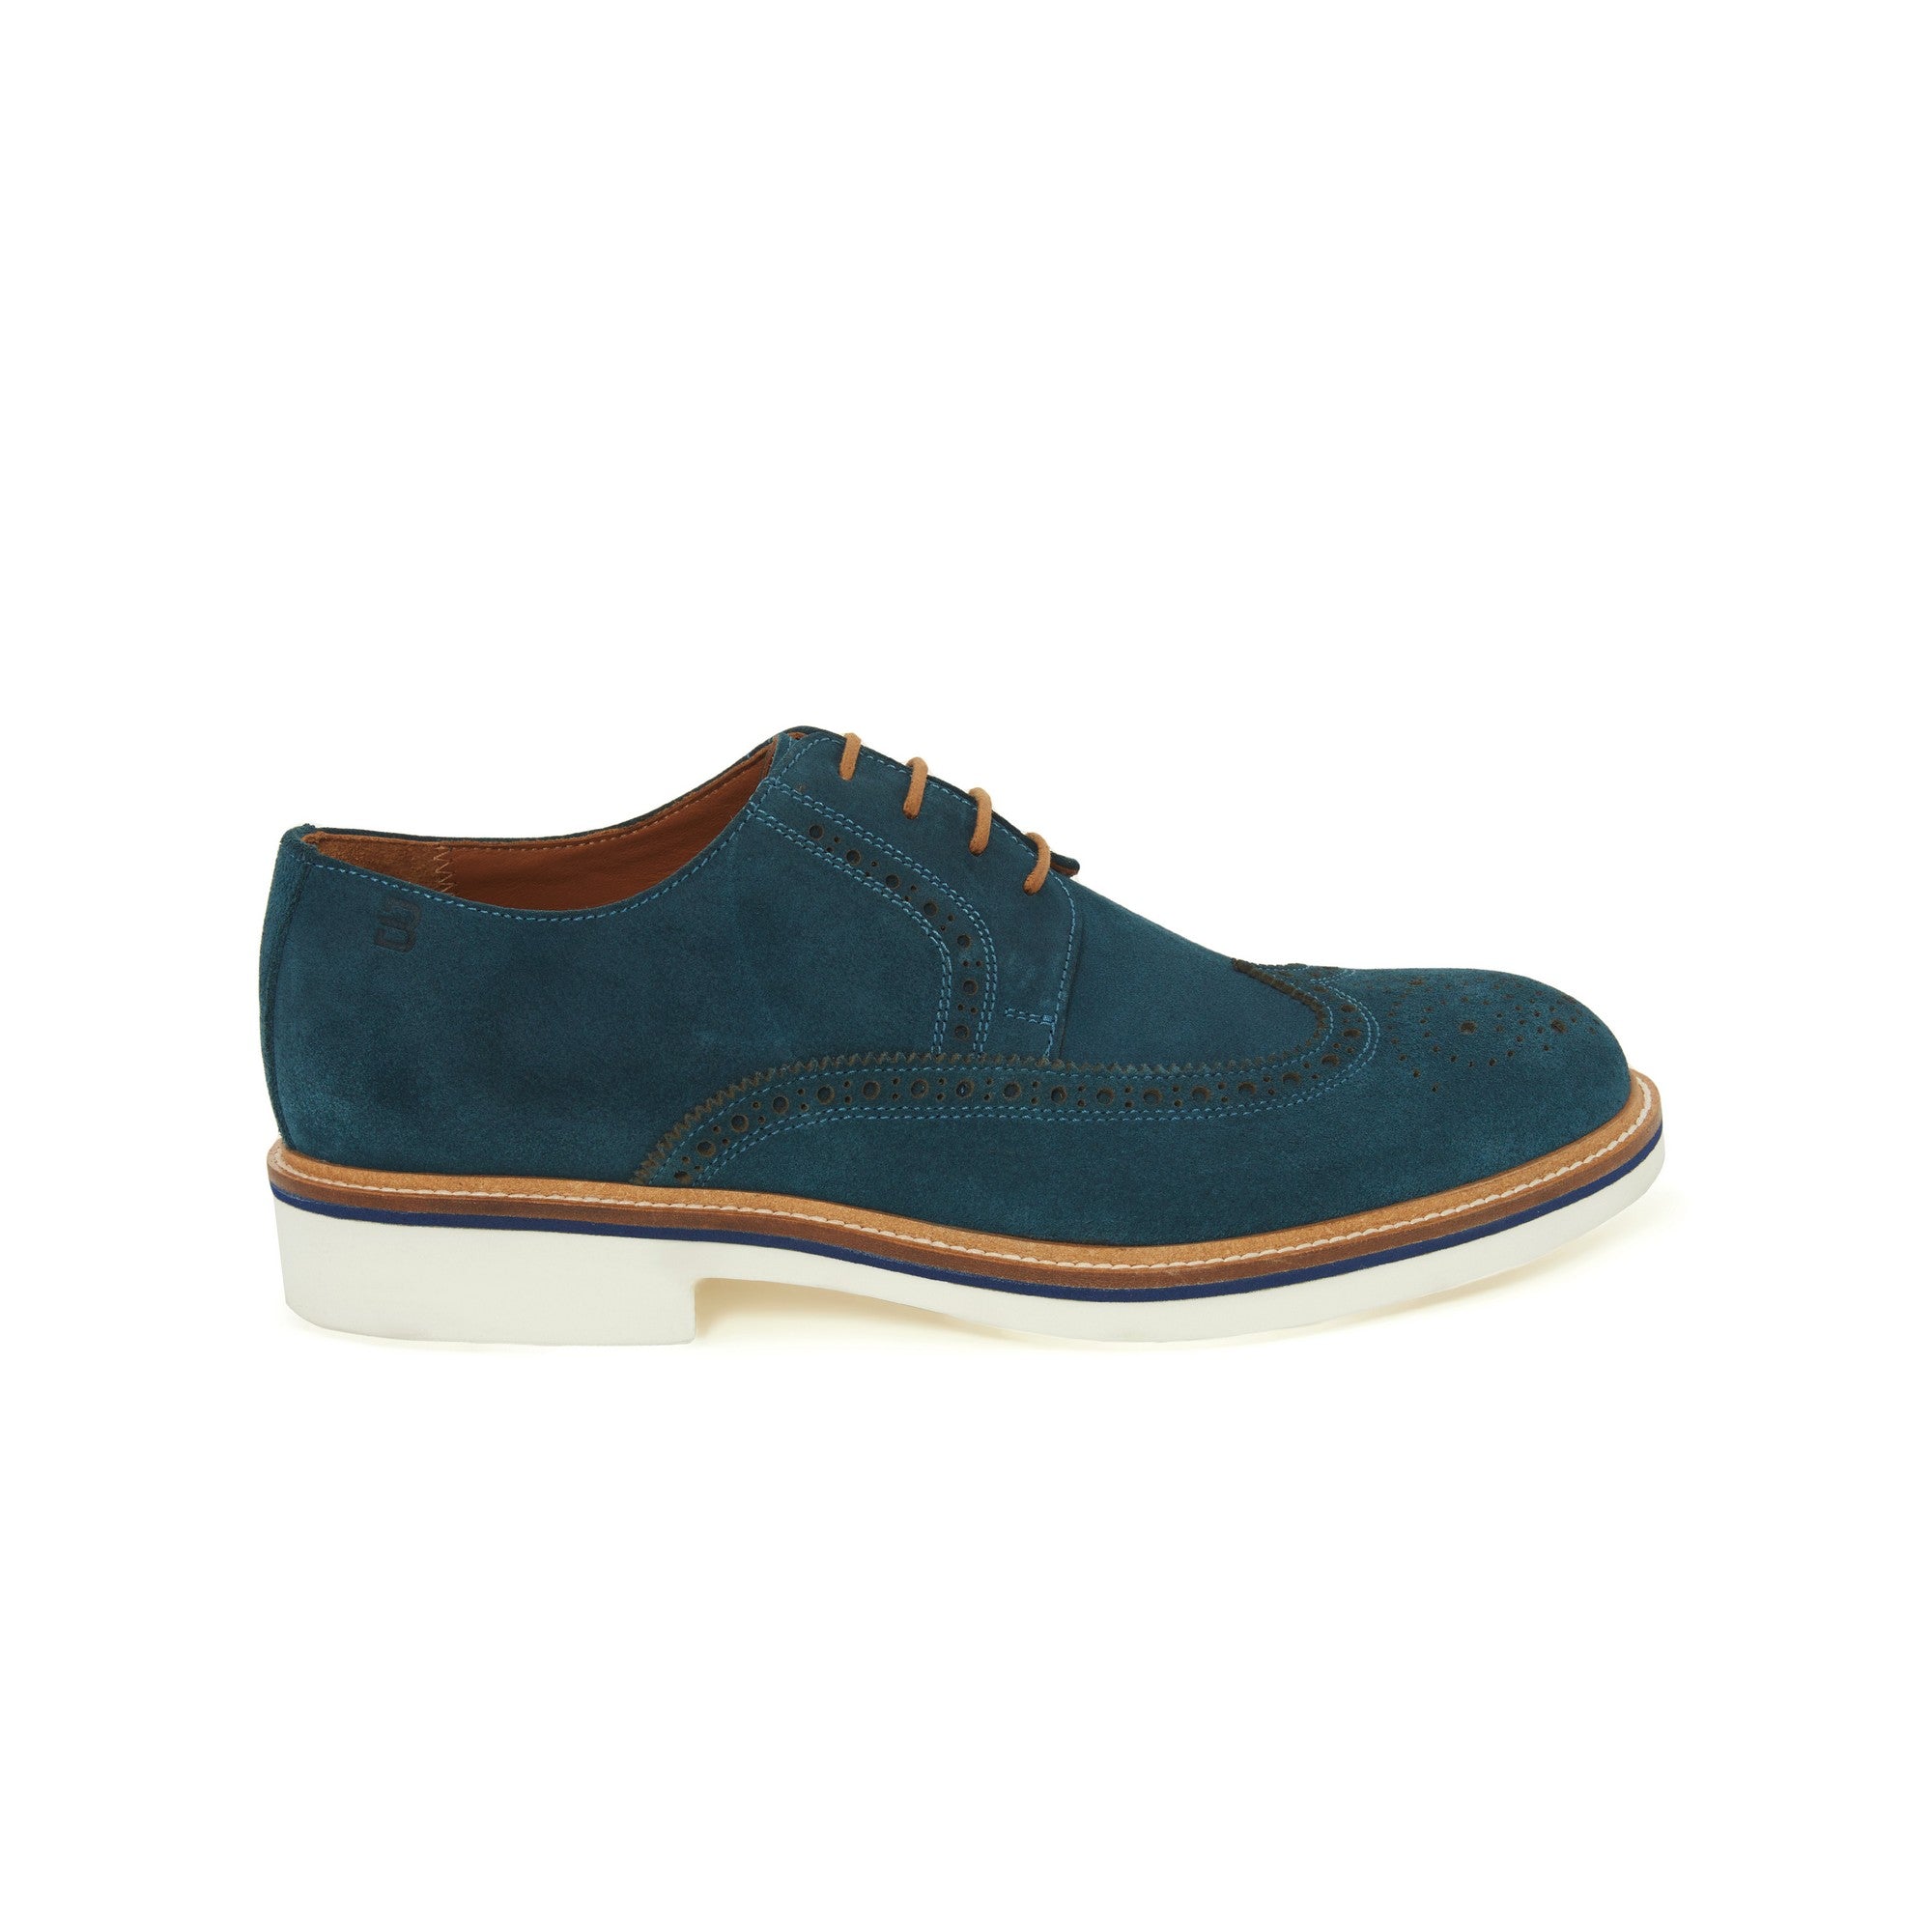 Men's Suede Calf Leather Handmade Oxford M9013